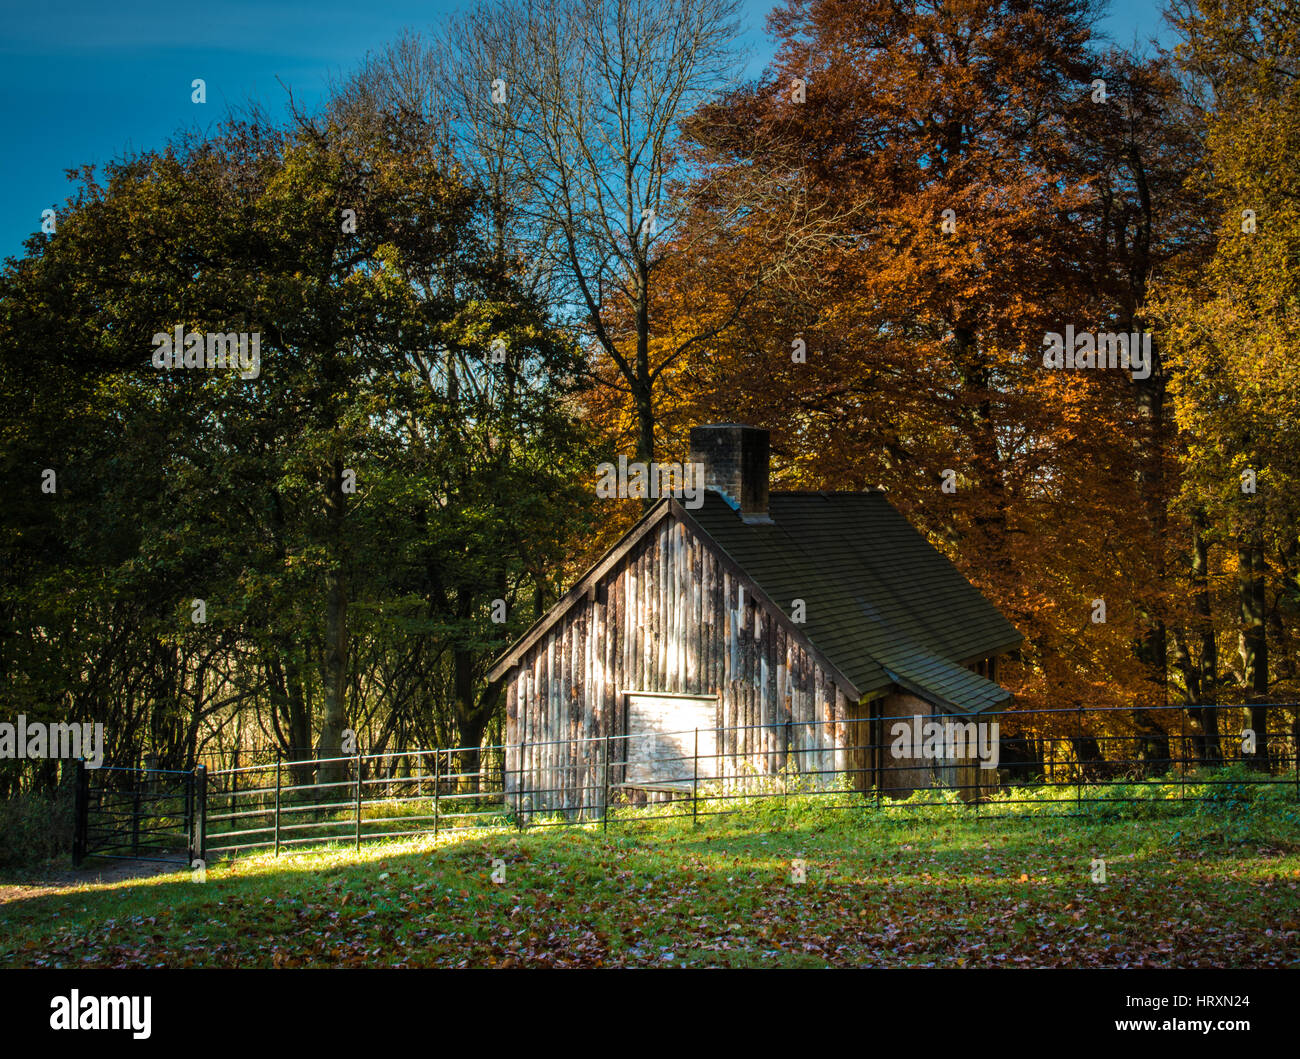 A wooden cabin in the autumn forest Stock Photo